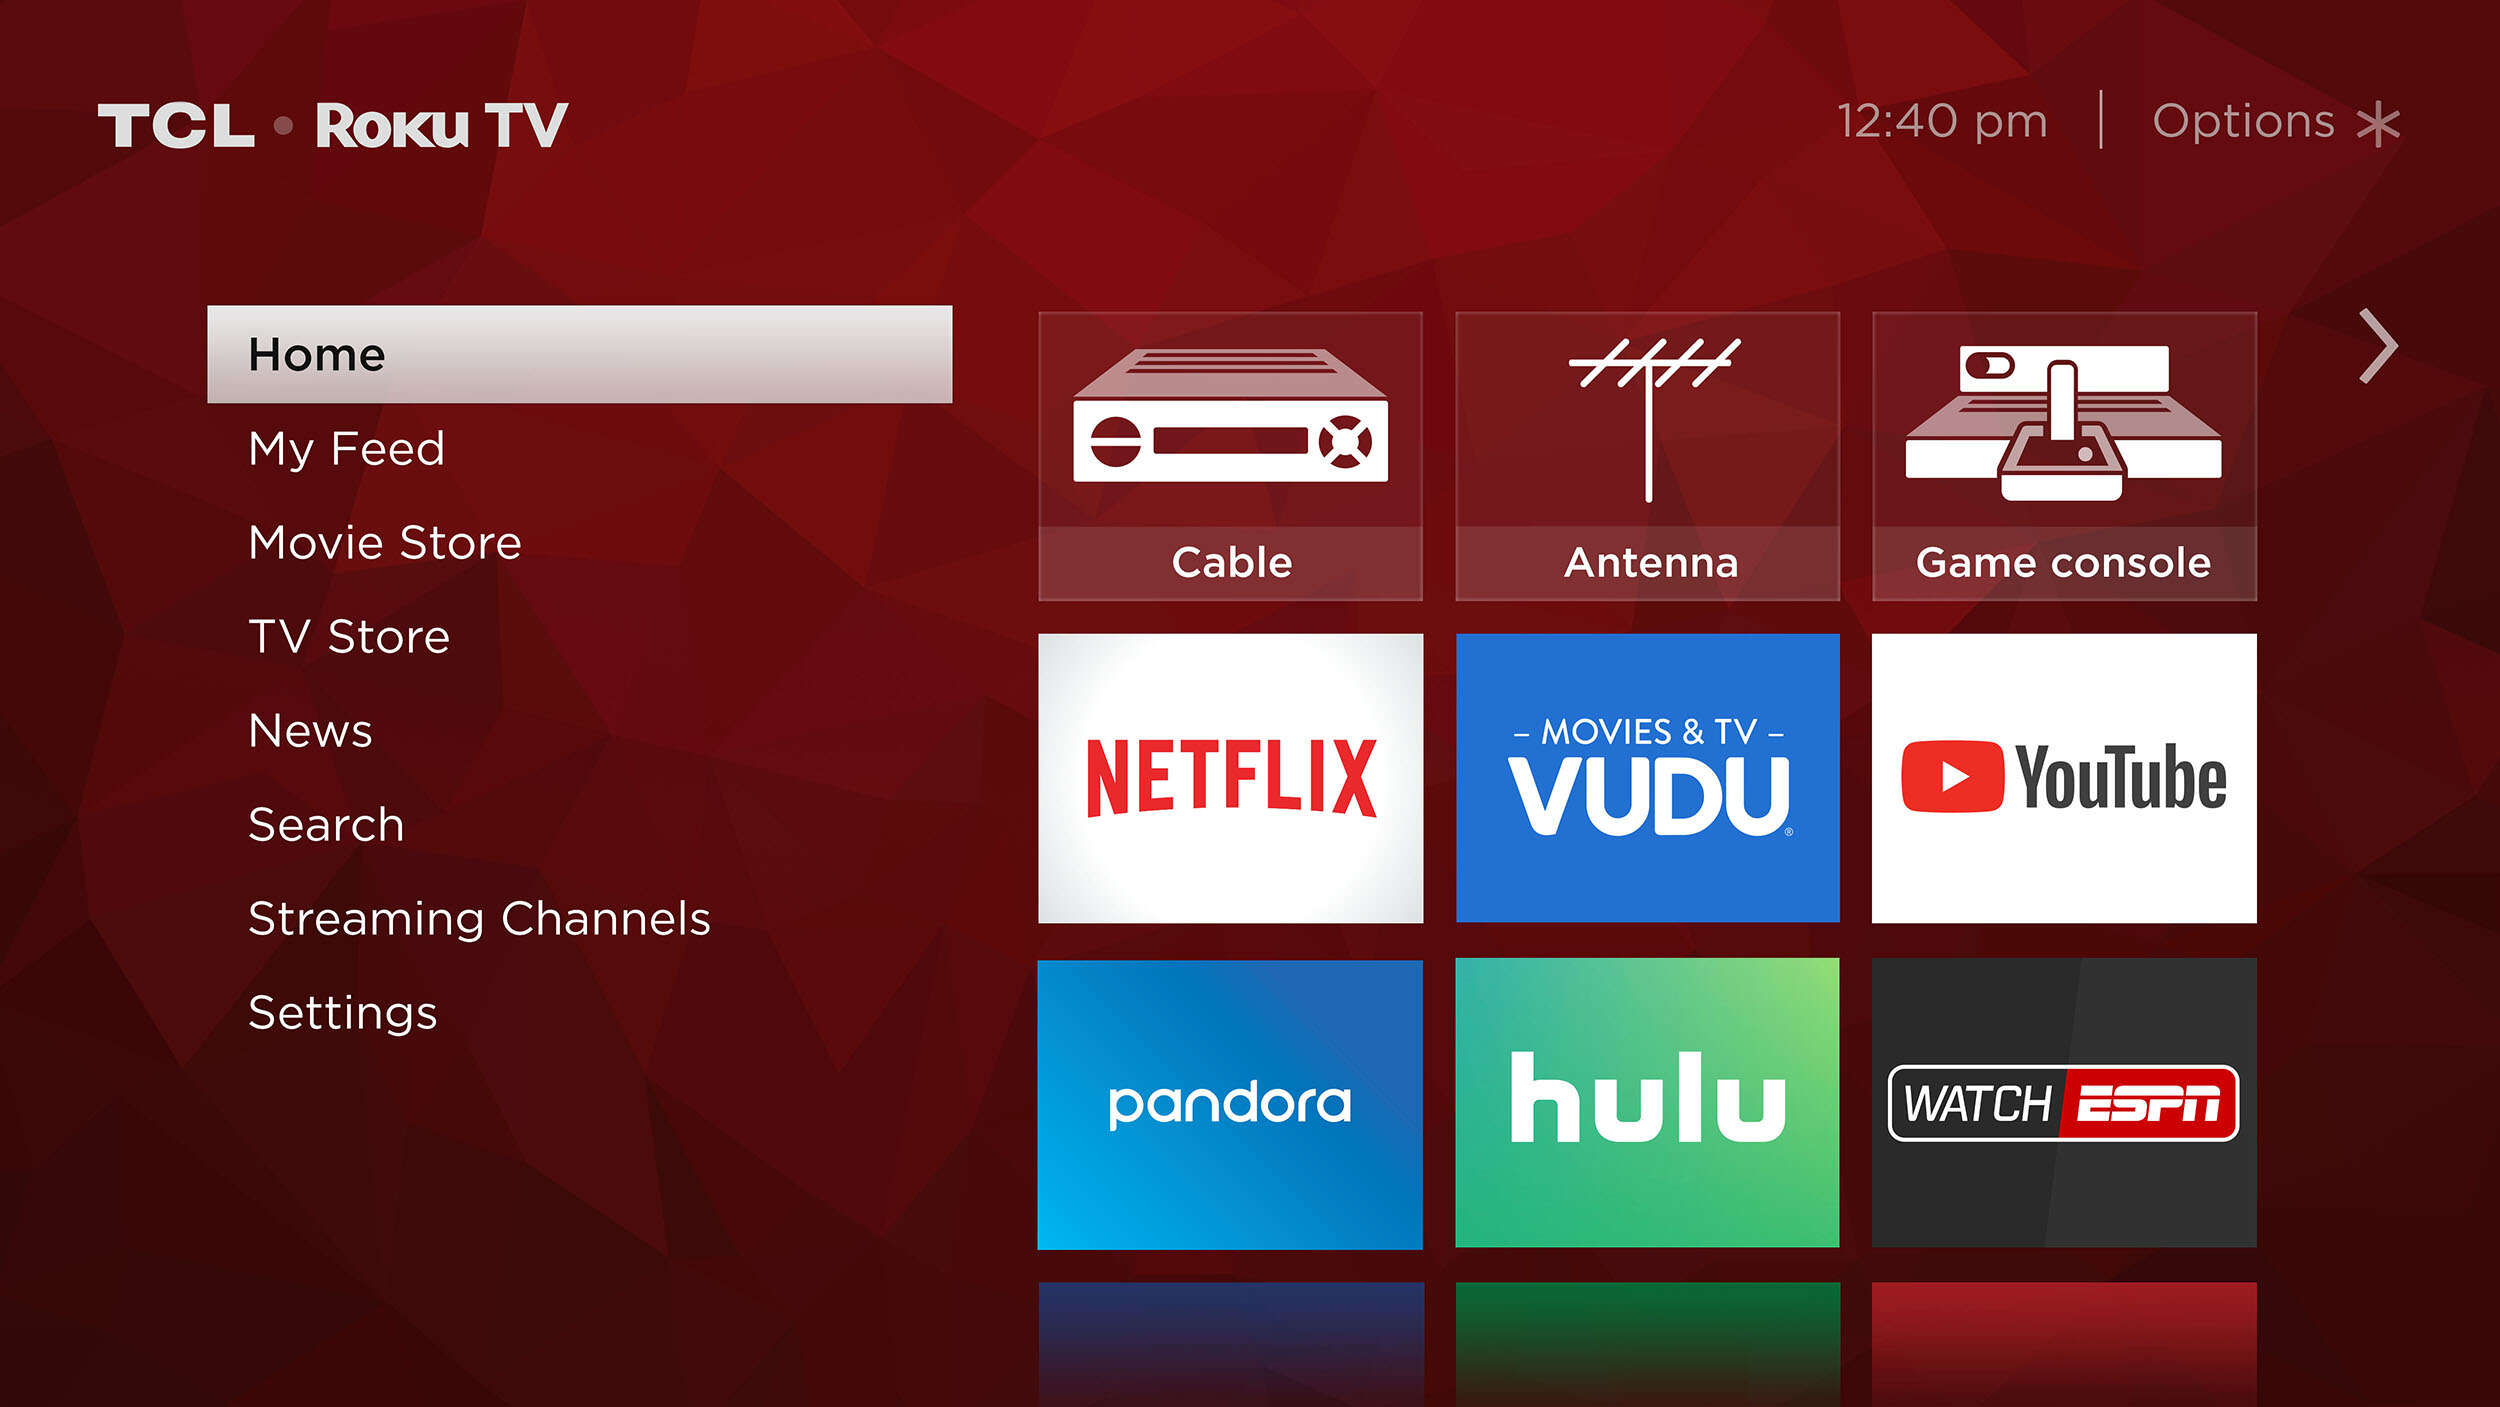 Is there a spotify app on roku streaming stick